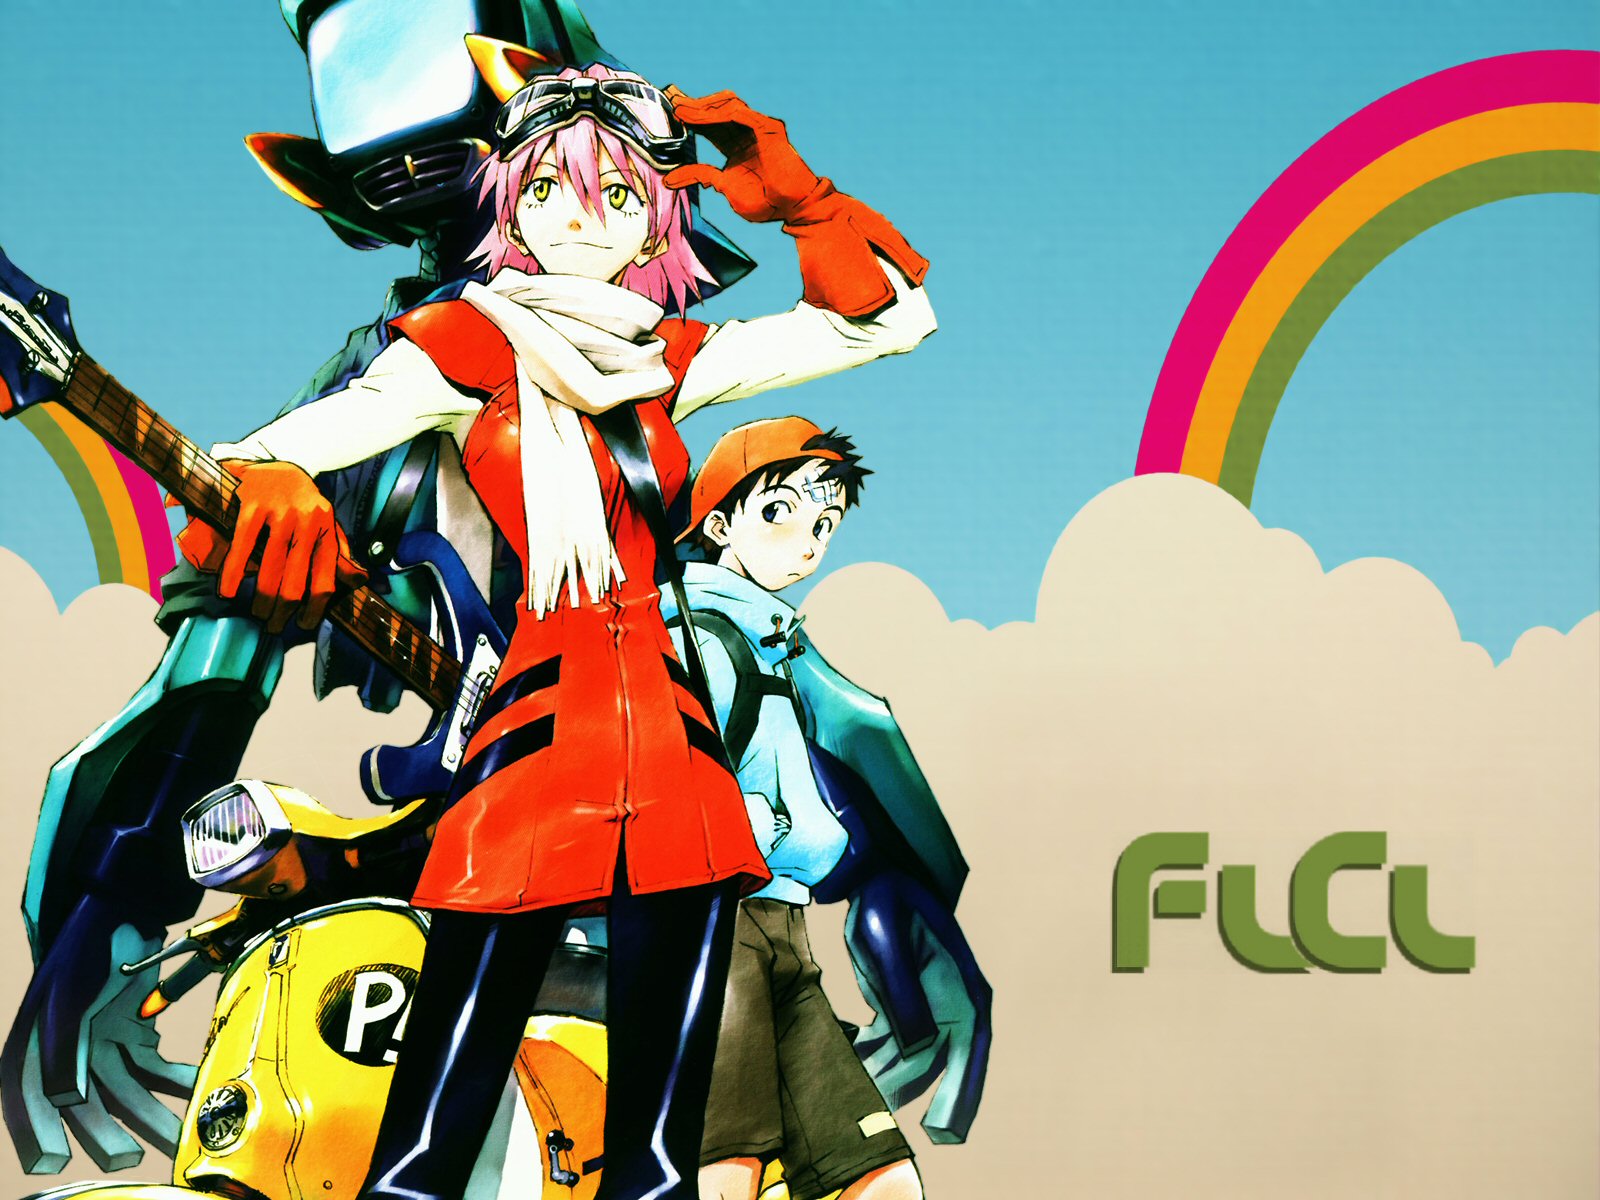 Geek insider, geekinsider, geekinsider. Com,, why haven't you seen it? Weekly free anime - flcl, comics